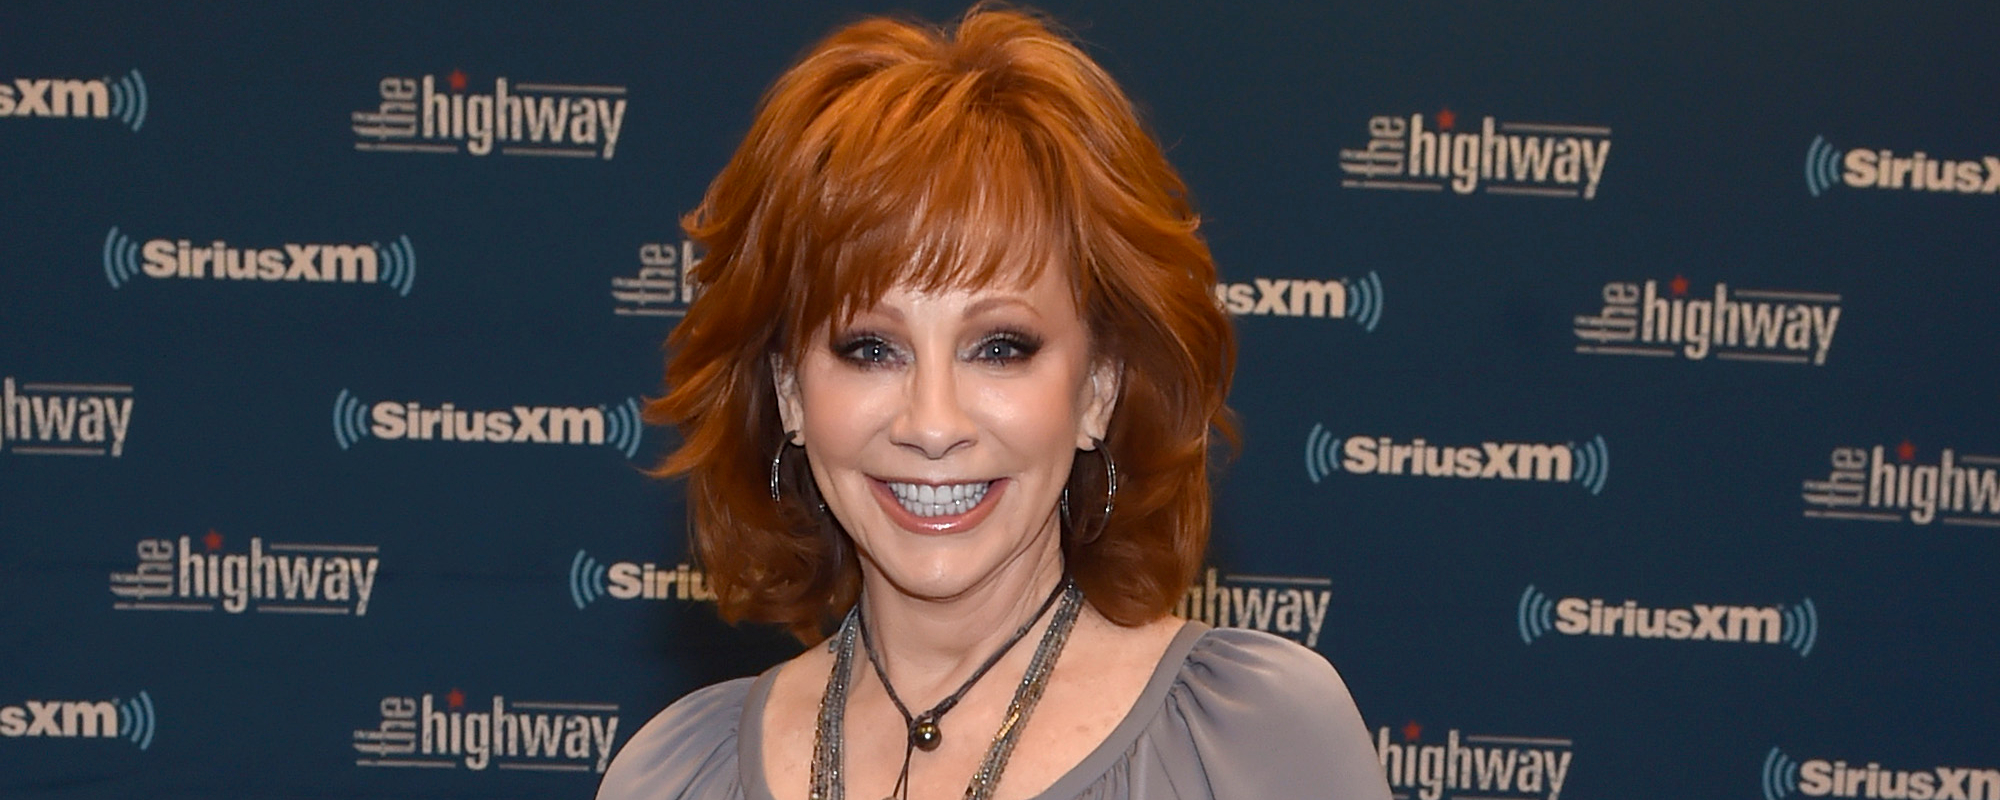 Reba McEntire Prepares for Her Return to TV With ‘Happy’s Place’: “Ain’t My First Rodeo”